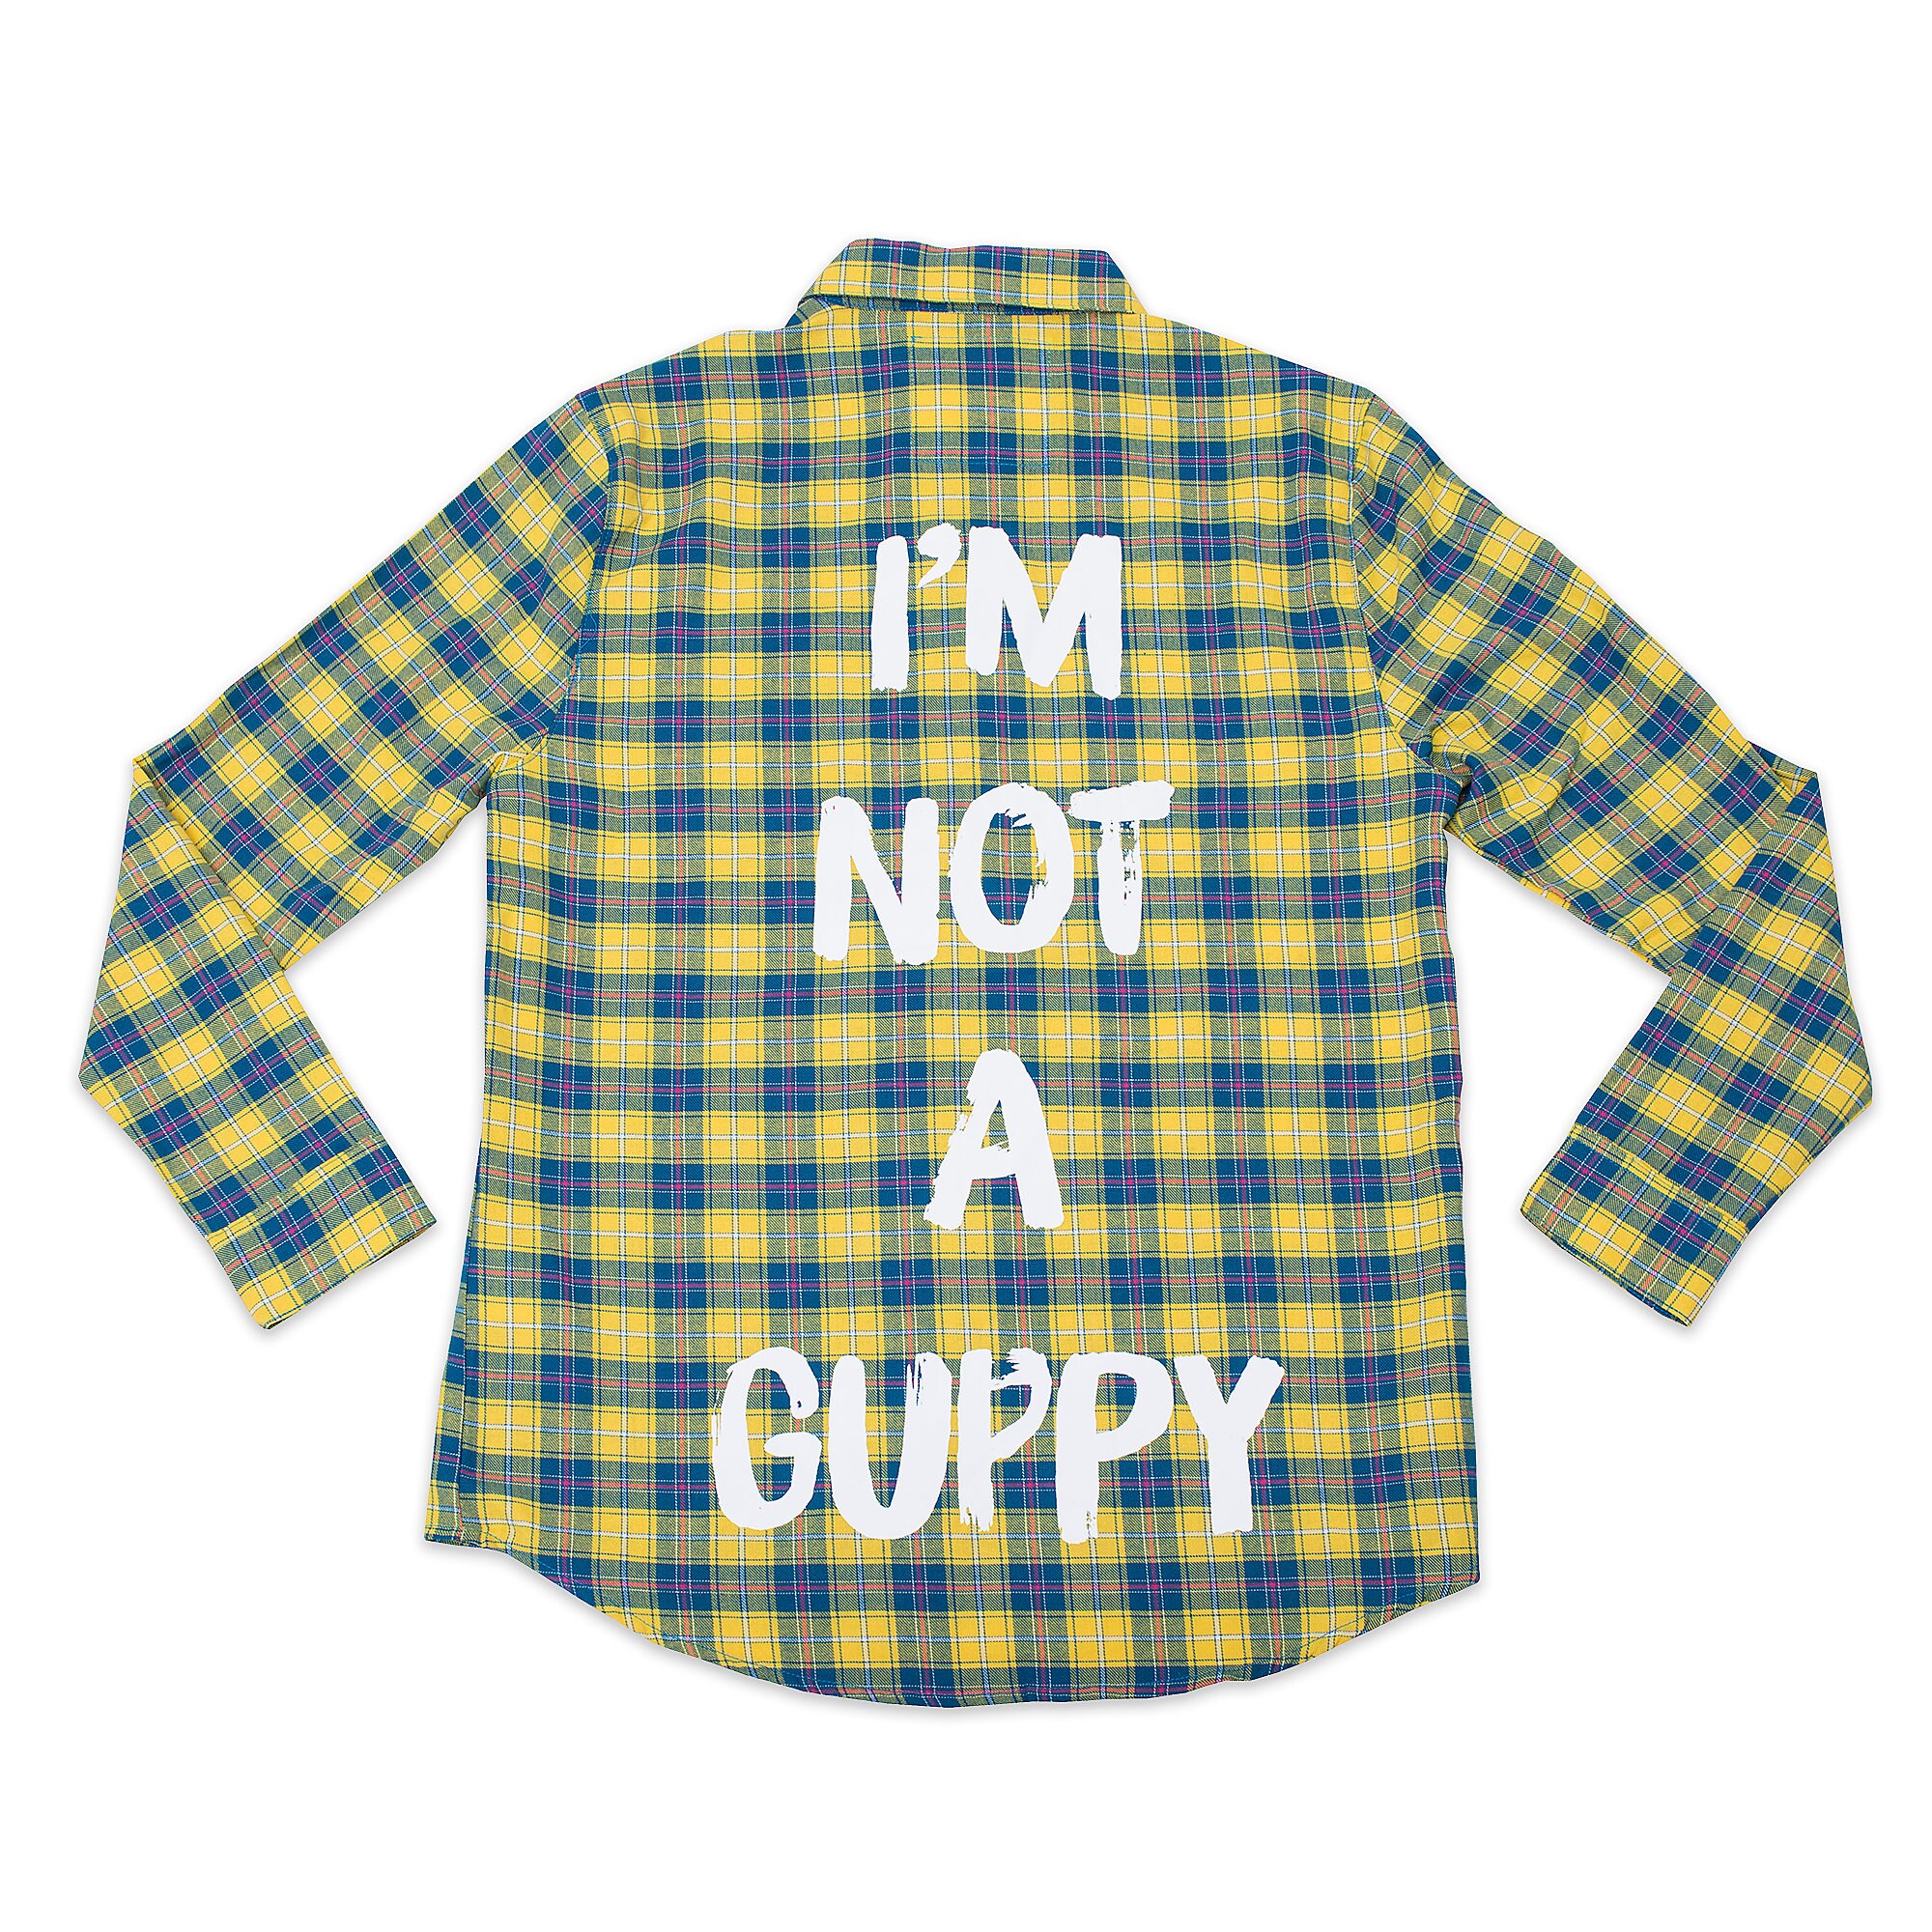 Flounder Flannel Shirt for Adults by Cakeworthy - The Little Mermaid